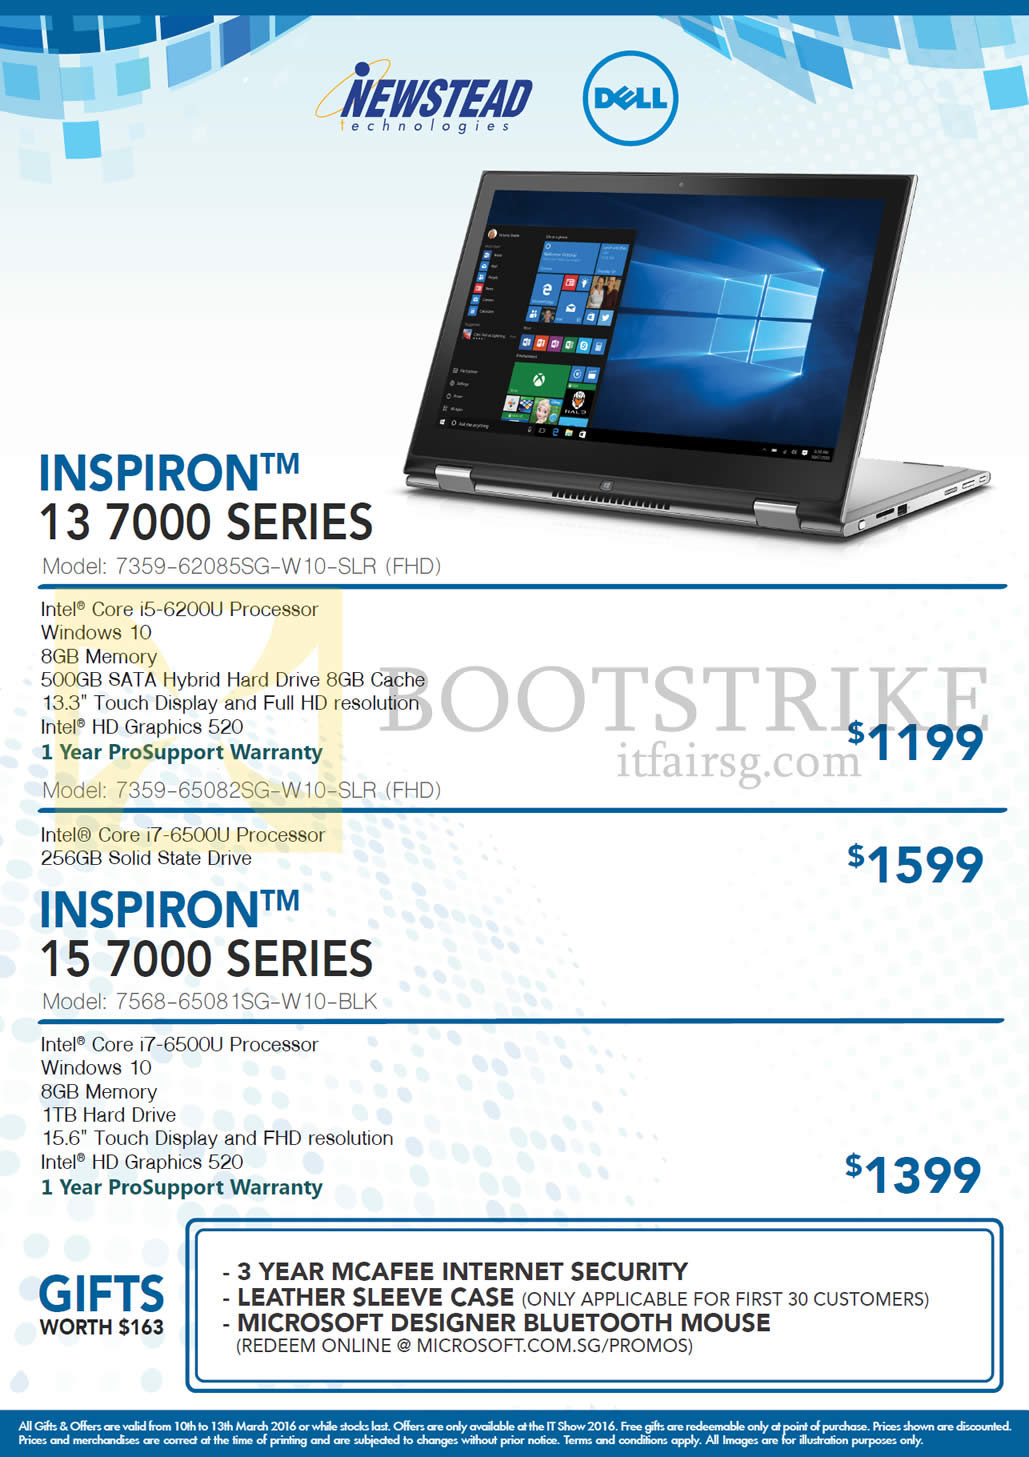 IT SHOW 2016 price list image brochure of Dell Newstead Inspiron Notebooks 13 7000, 15 7000 Series